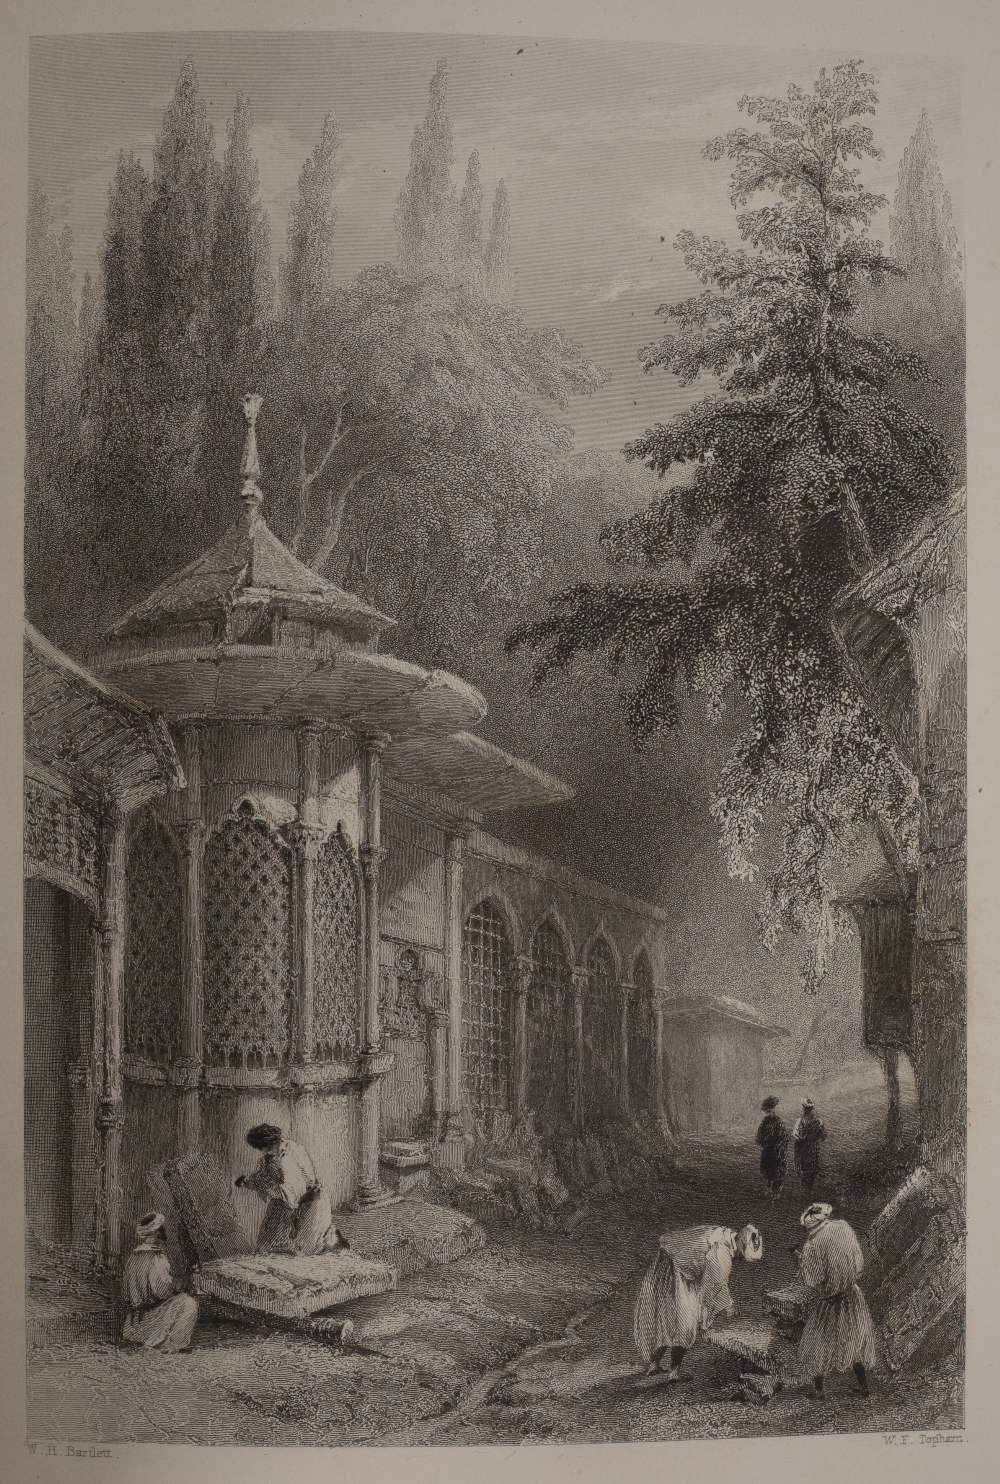 Book Pardoe, The Beauties of the Bosphorus, illustrated in a series of Views of Constantinople and - Image 5 of 6